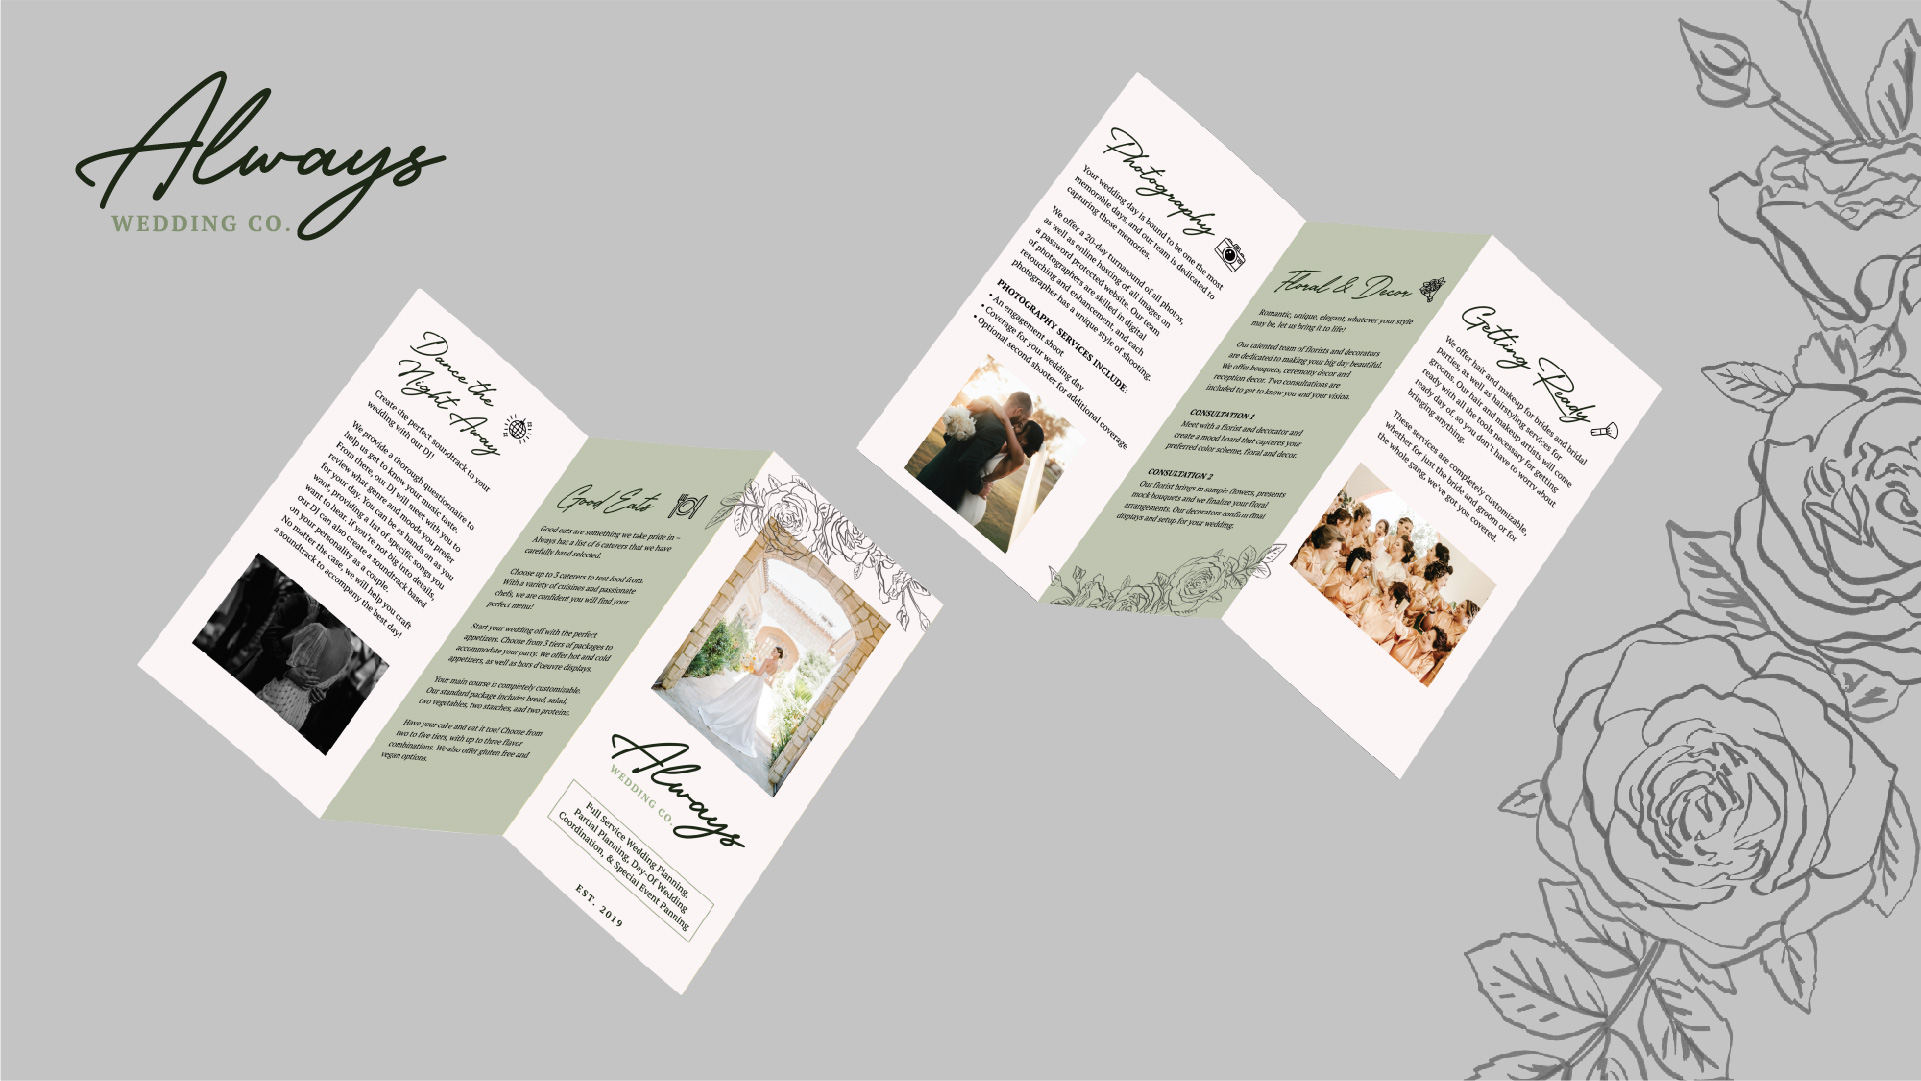  / “Always, Wedding Company Brochure,” informational brochure, 11 x 8.5, 2021. This brochure acts as an advertisement/informational piece for Always, a wedding planning company. The brochure outlines the different services Always offers. 